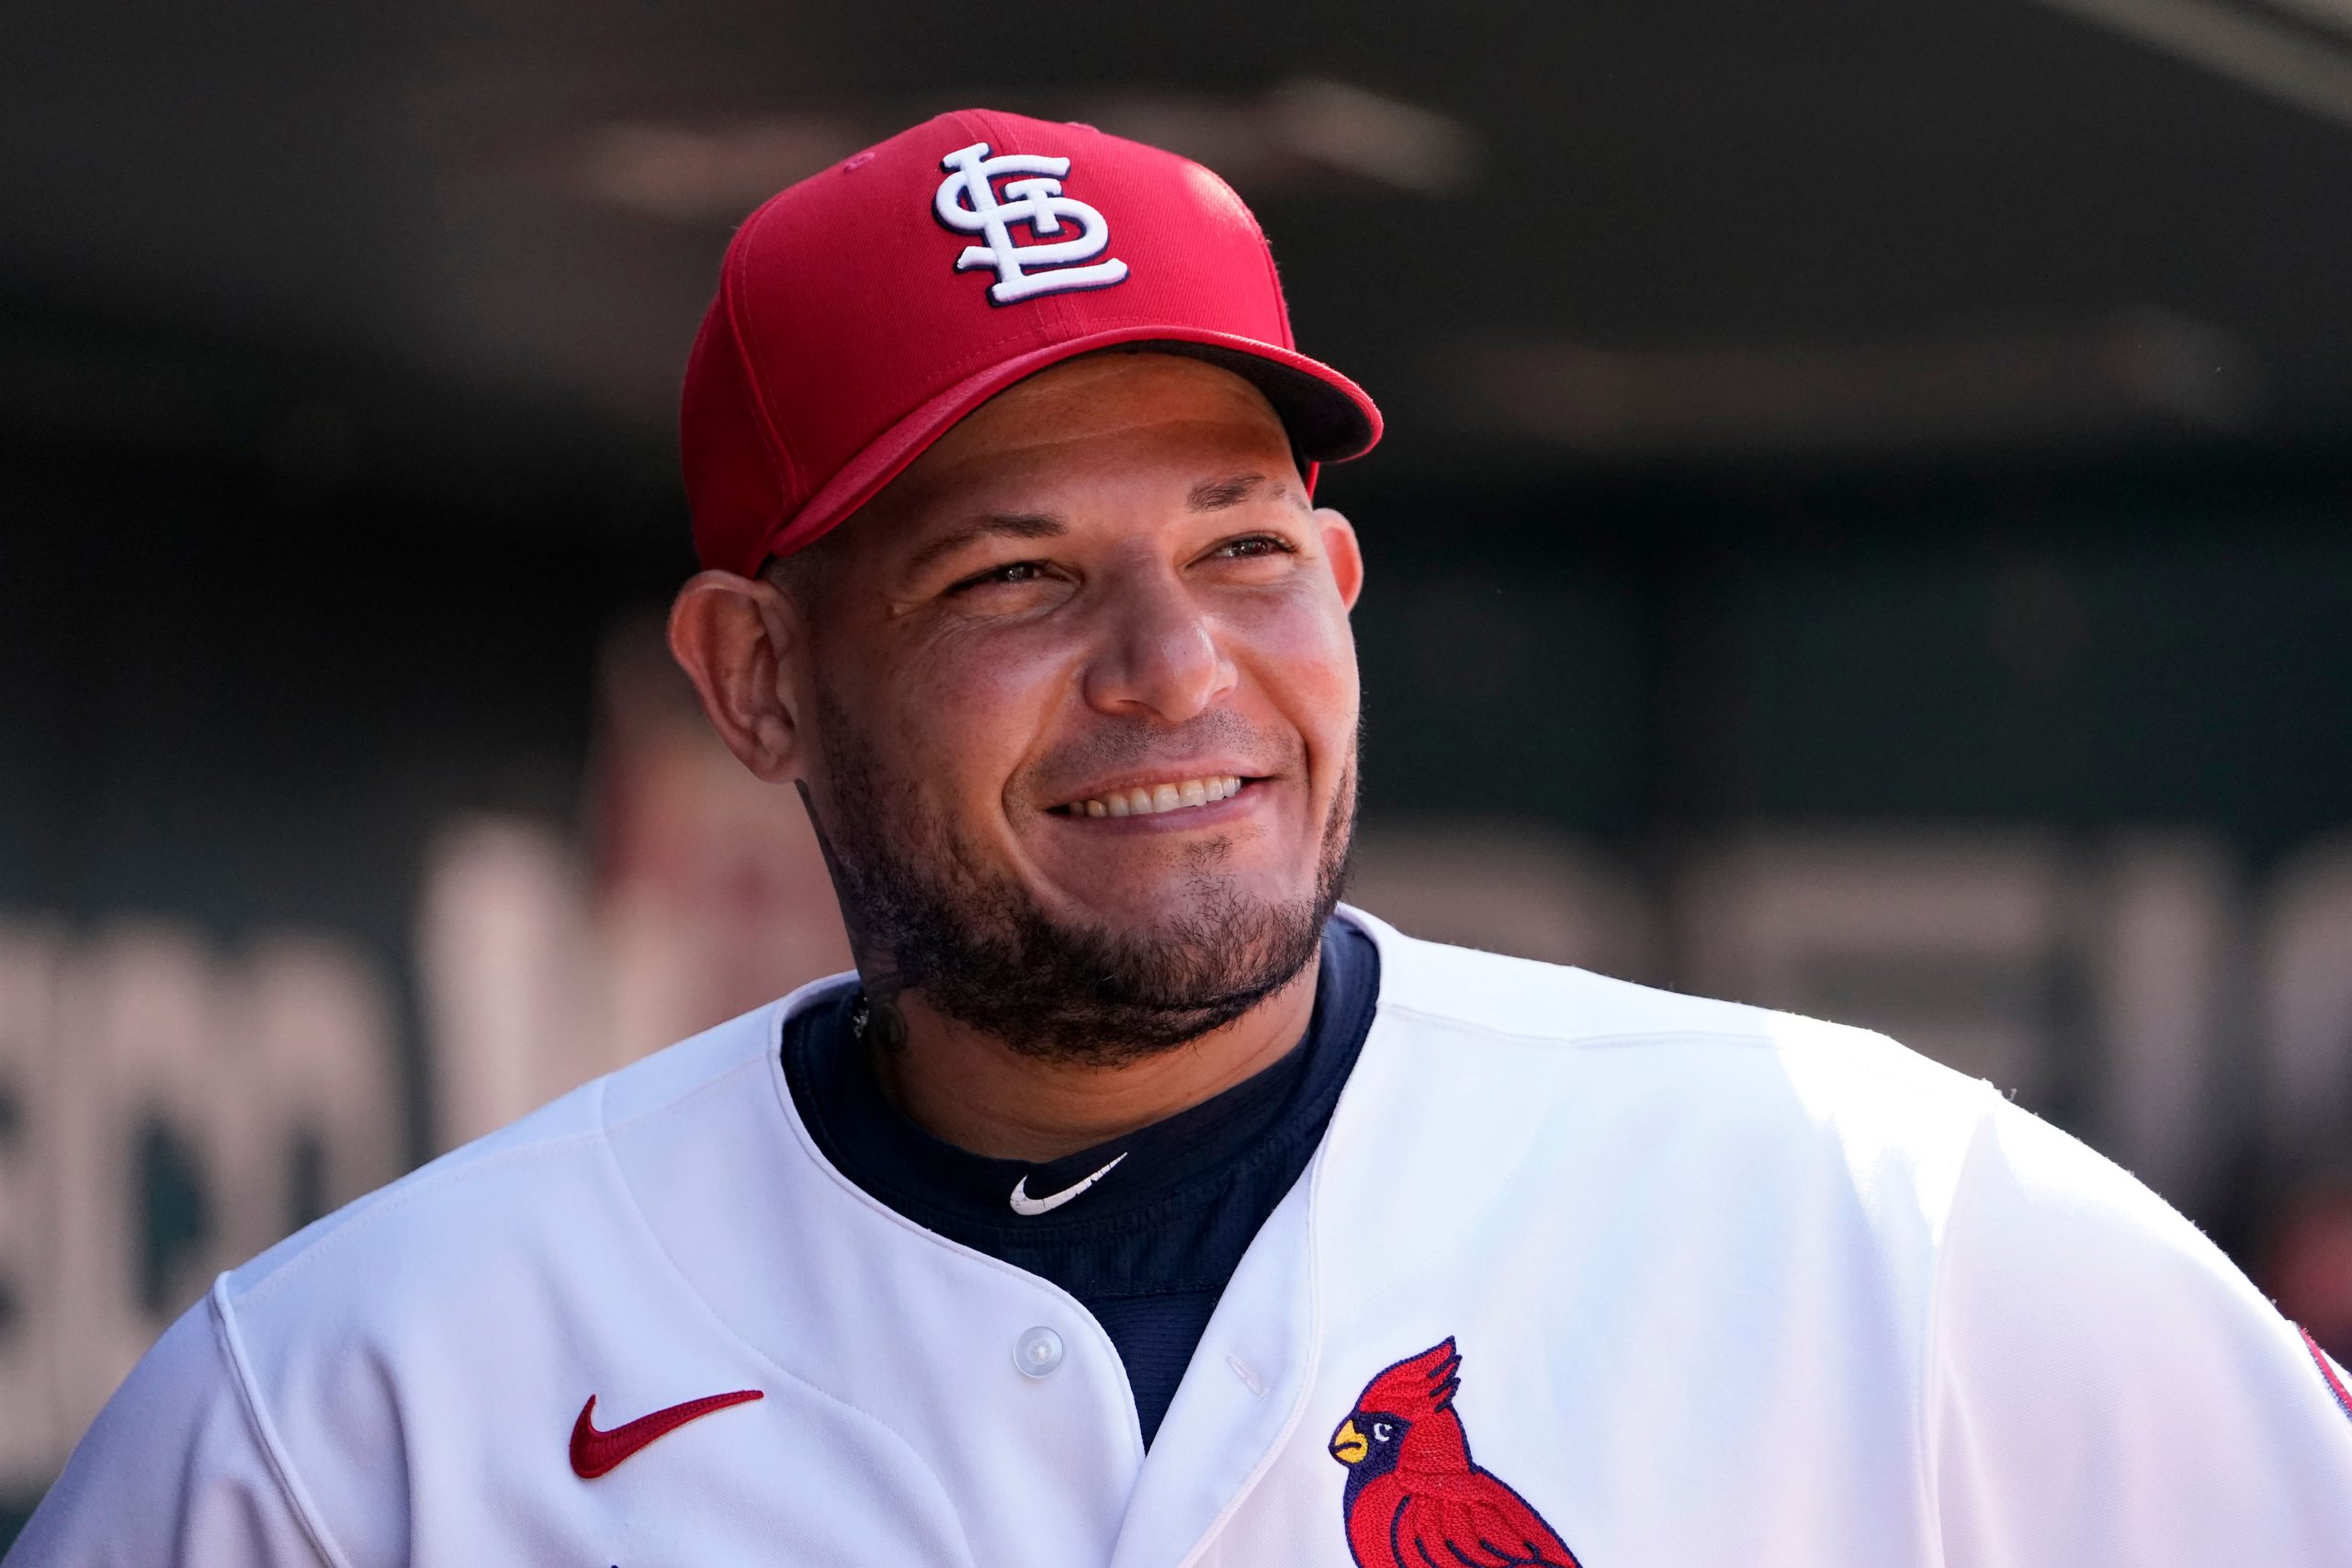 MLB: Yadier Molina to retire next year, agrees to $10 million deal with St. Louis Cardinals